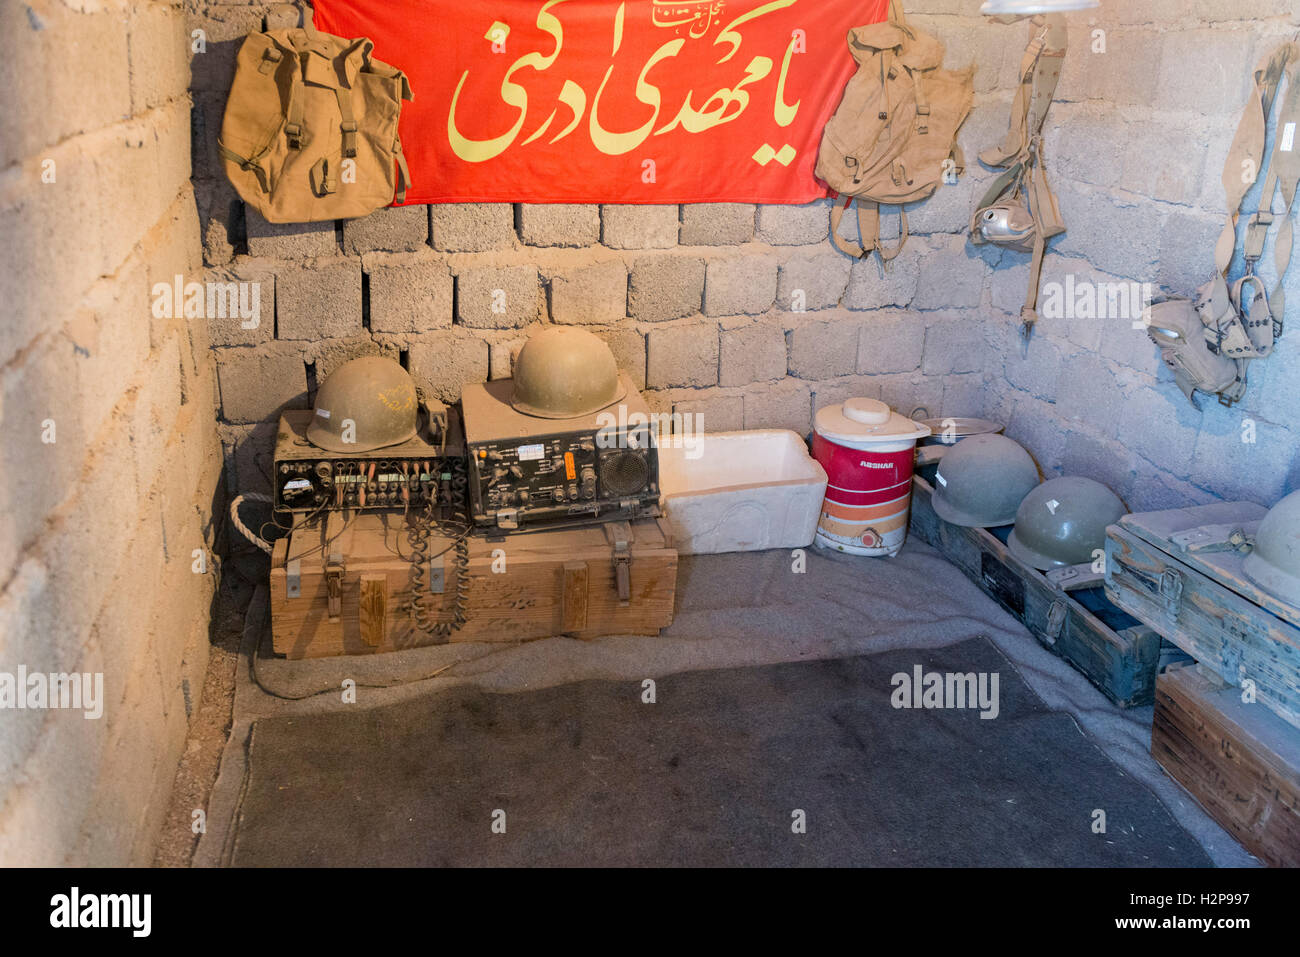 Kerman, Museum Of The Holy Defence, Transmission Equipment Inside Iraqi War Bunker Stock Photo